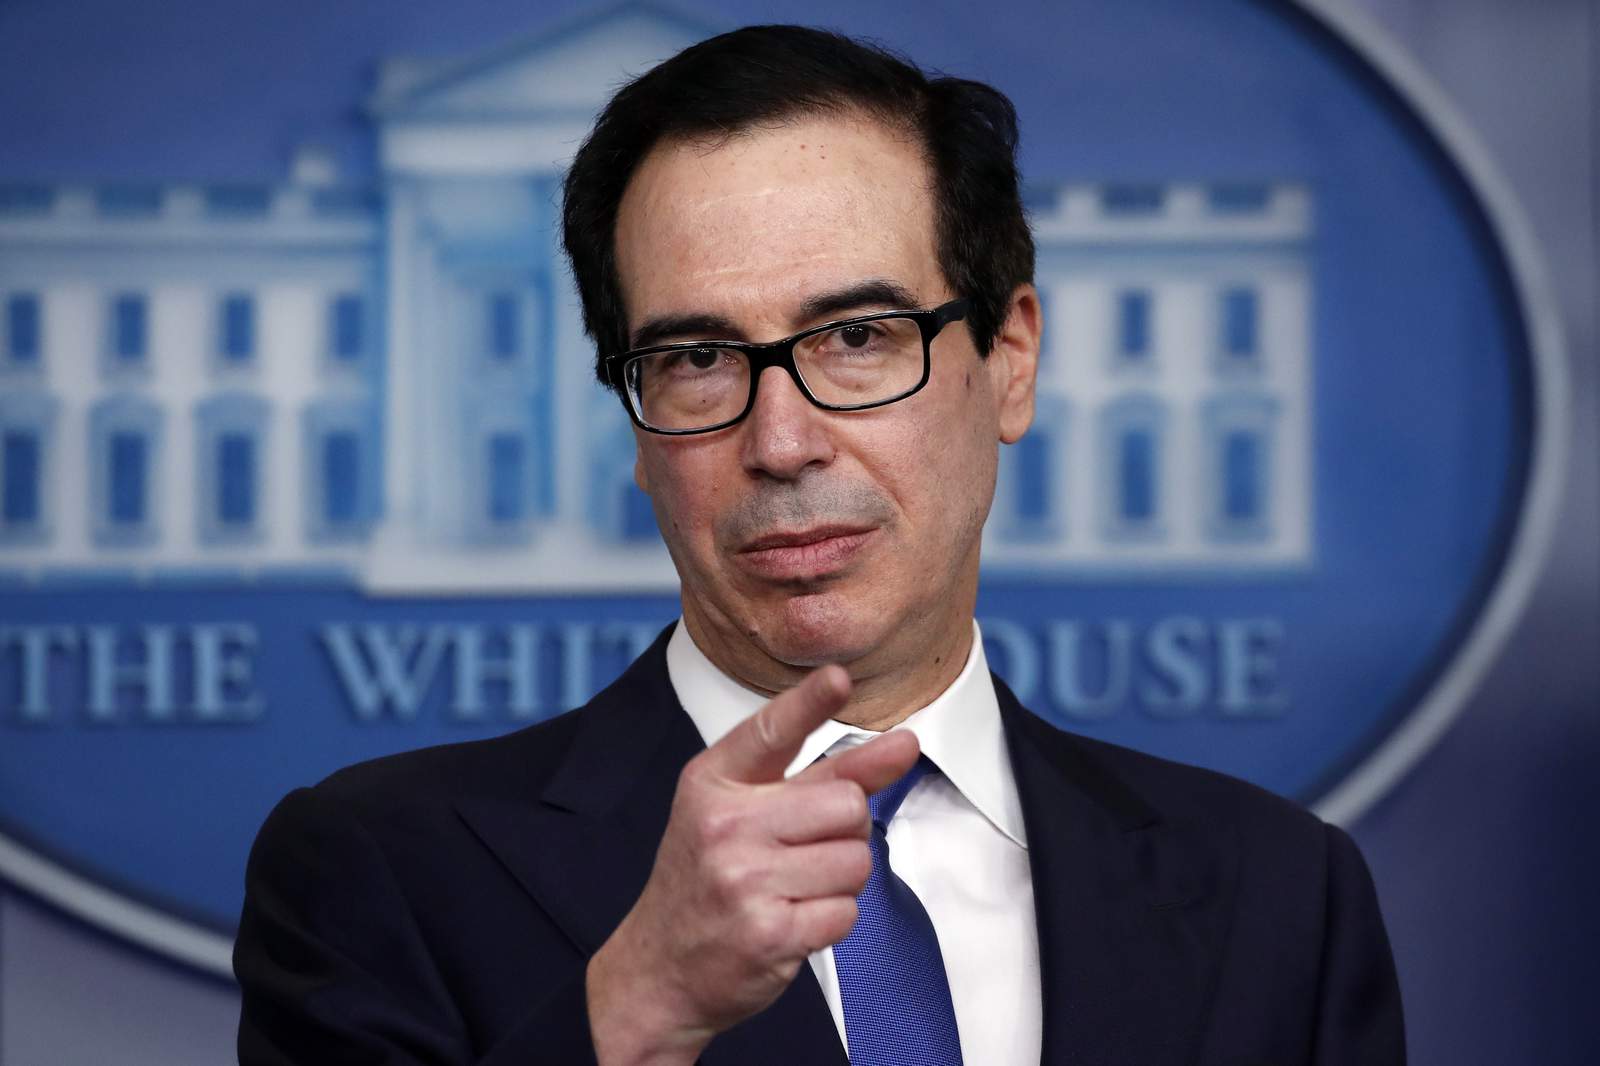 Mnuchin says ‘we are very close to a deal today’ on small business package